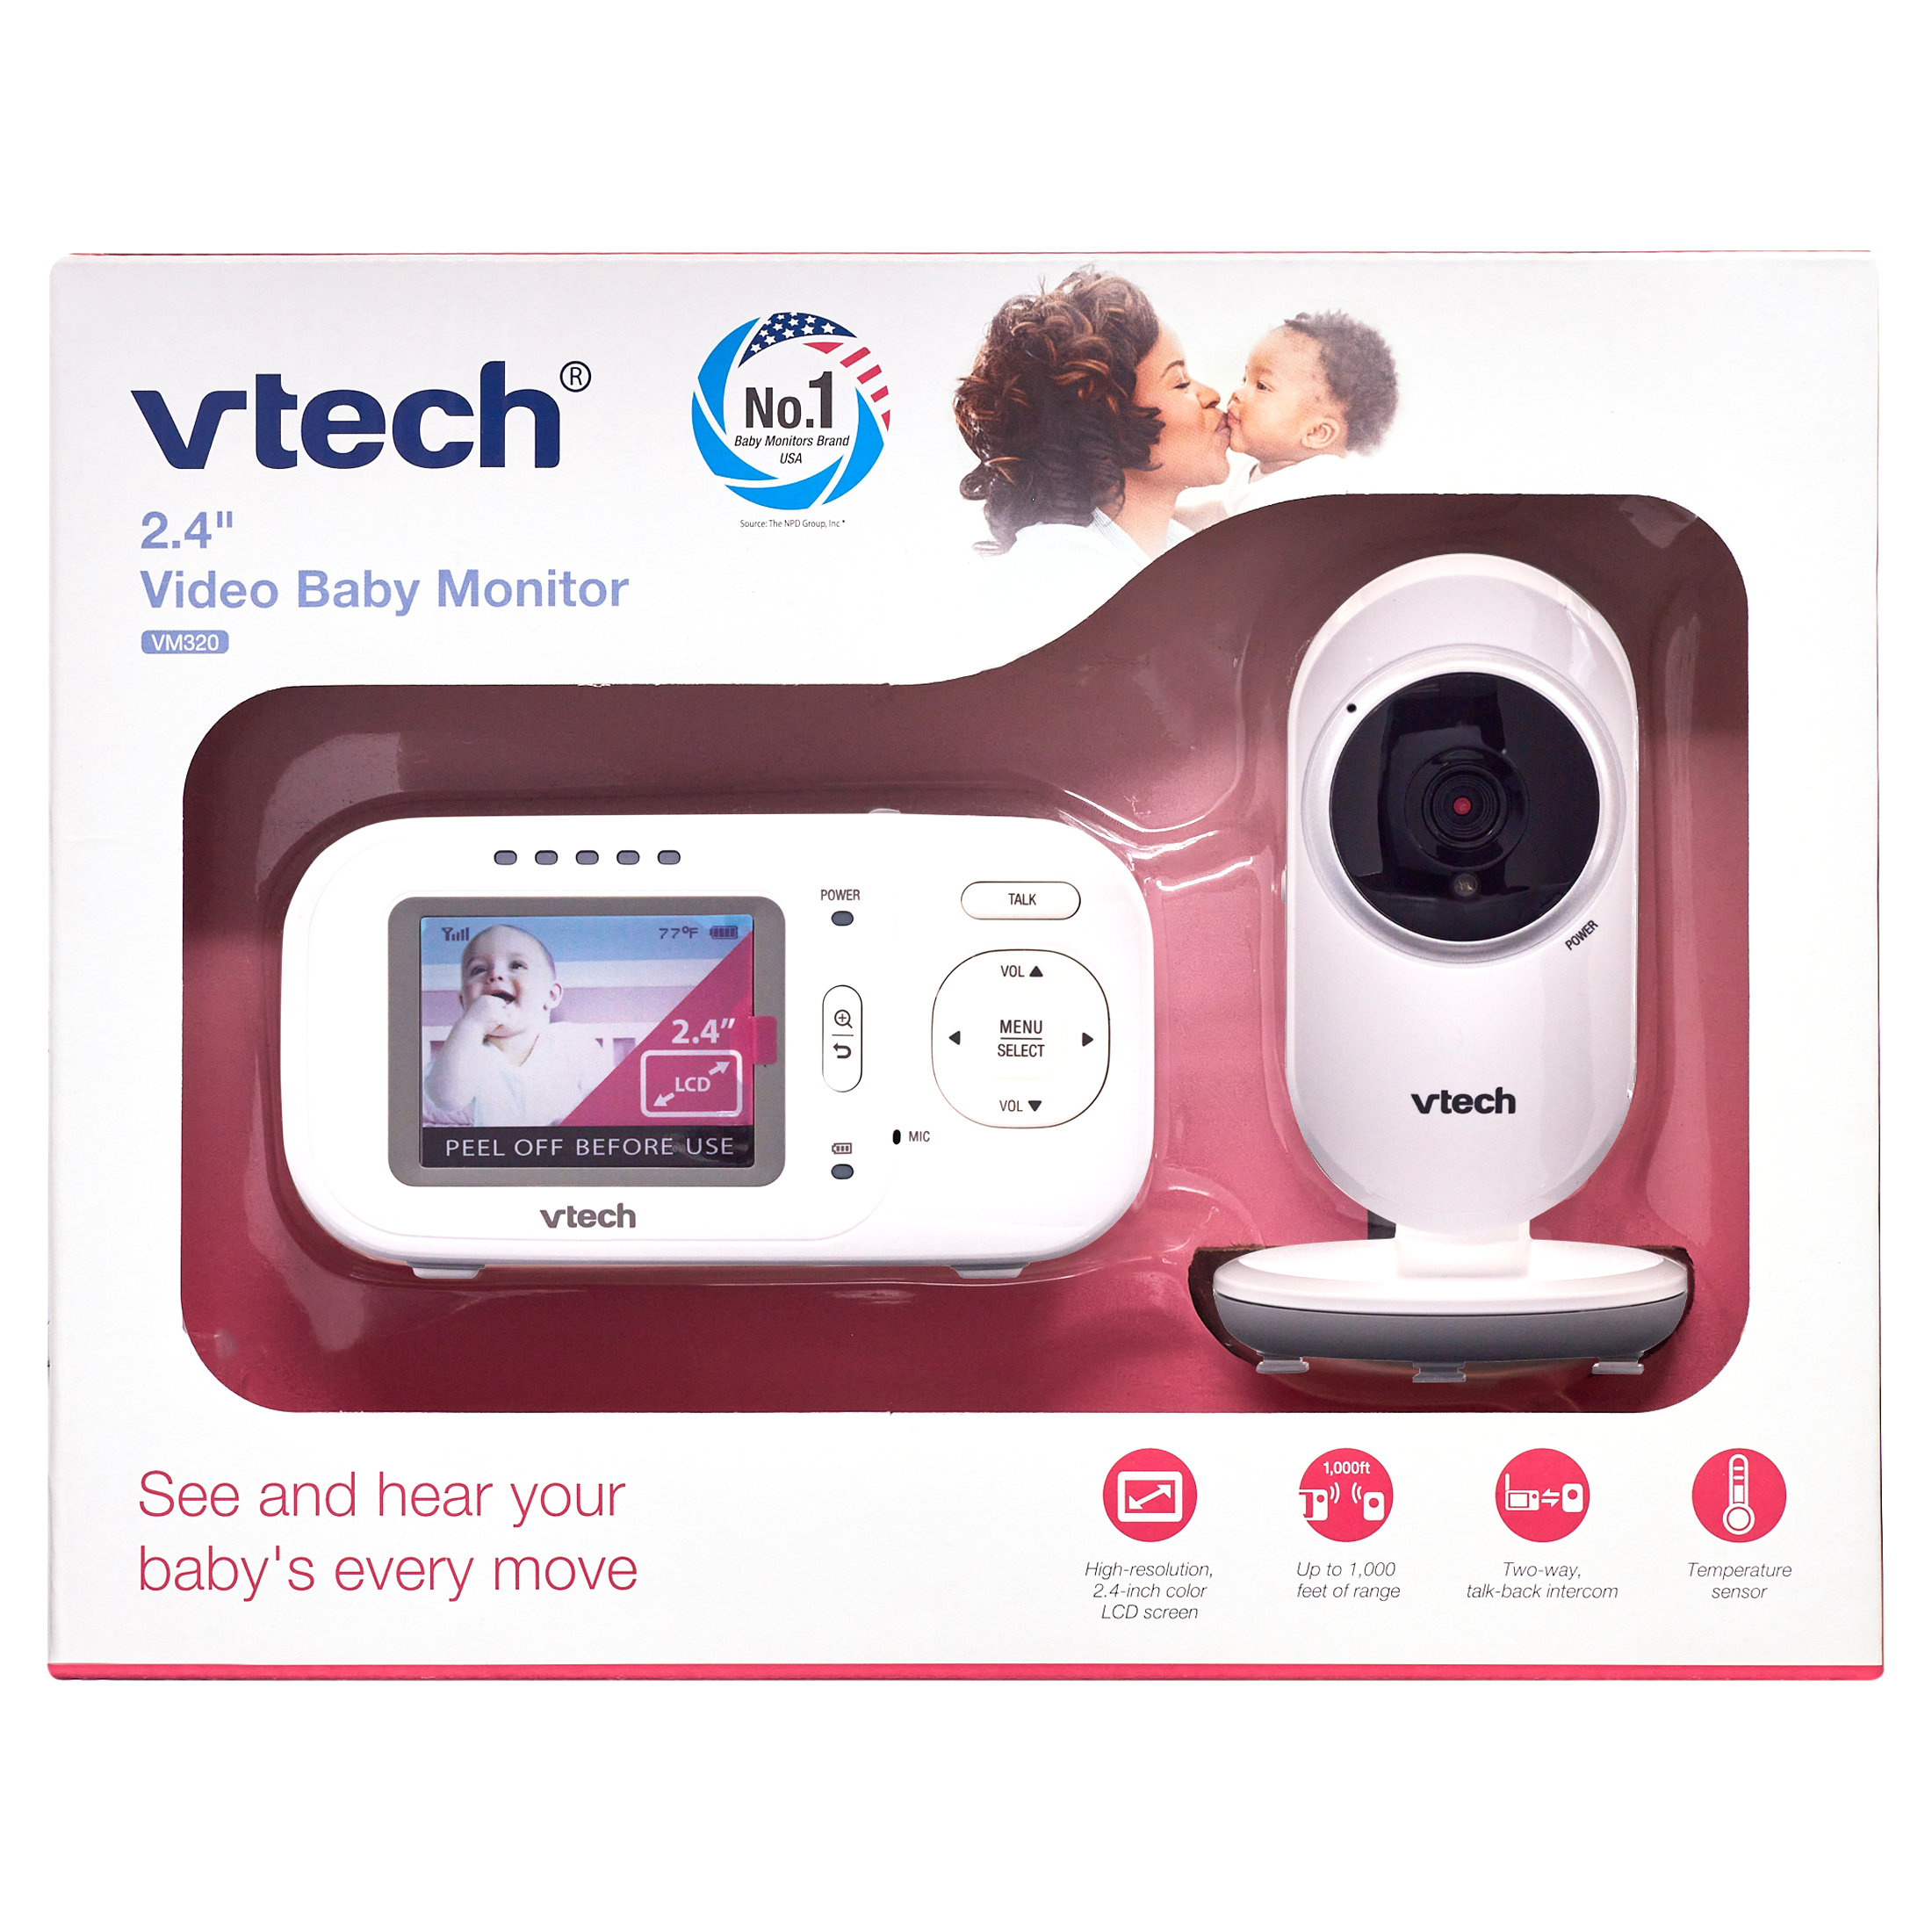 VTech VM320 2.4" Video Baby Monitor with Full-Color and Automatic Night Vision, White - image 4 of 8